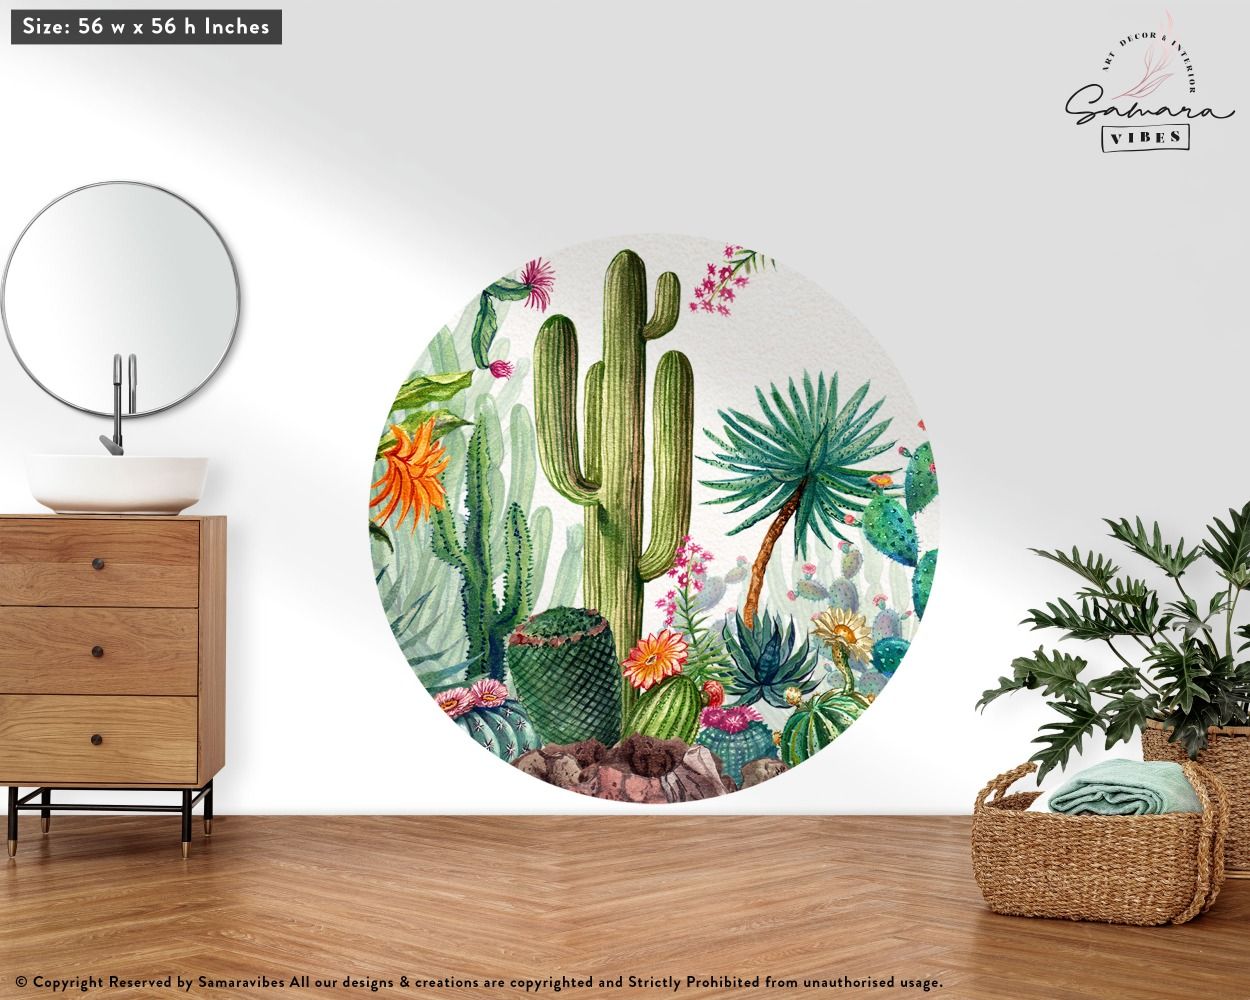 Cactus & Succulents Wall Decals for Bedroom Wall Decor